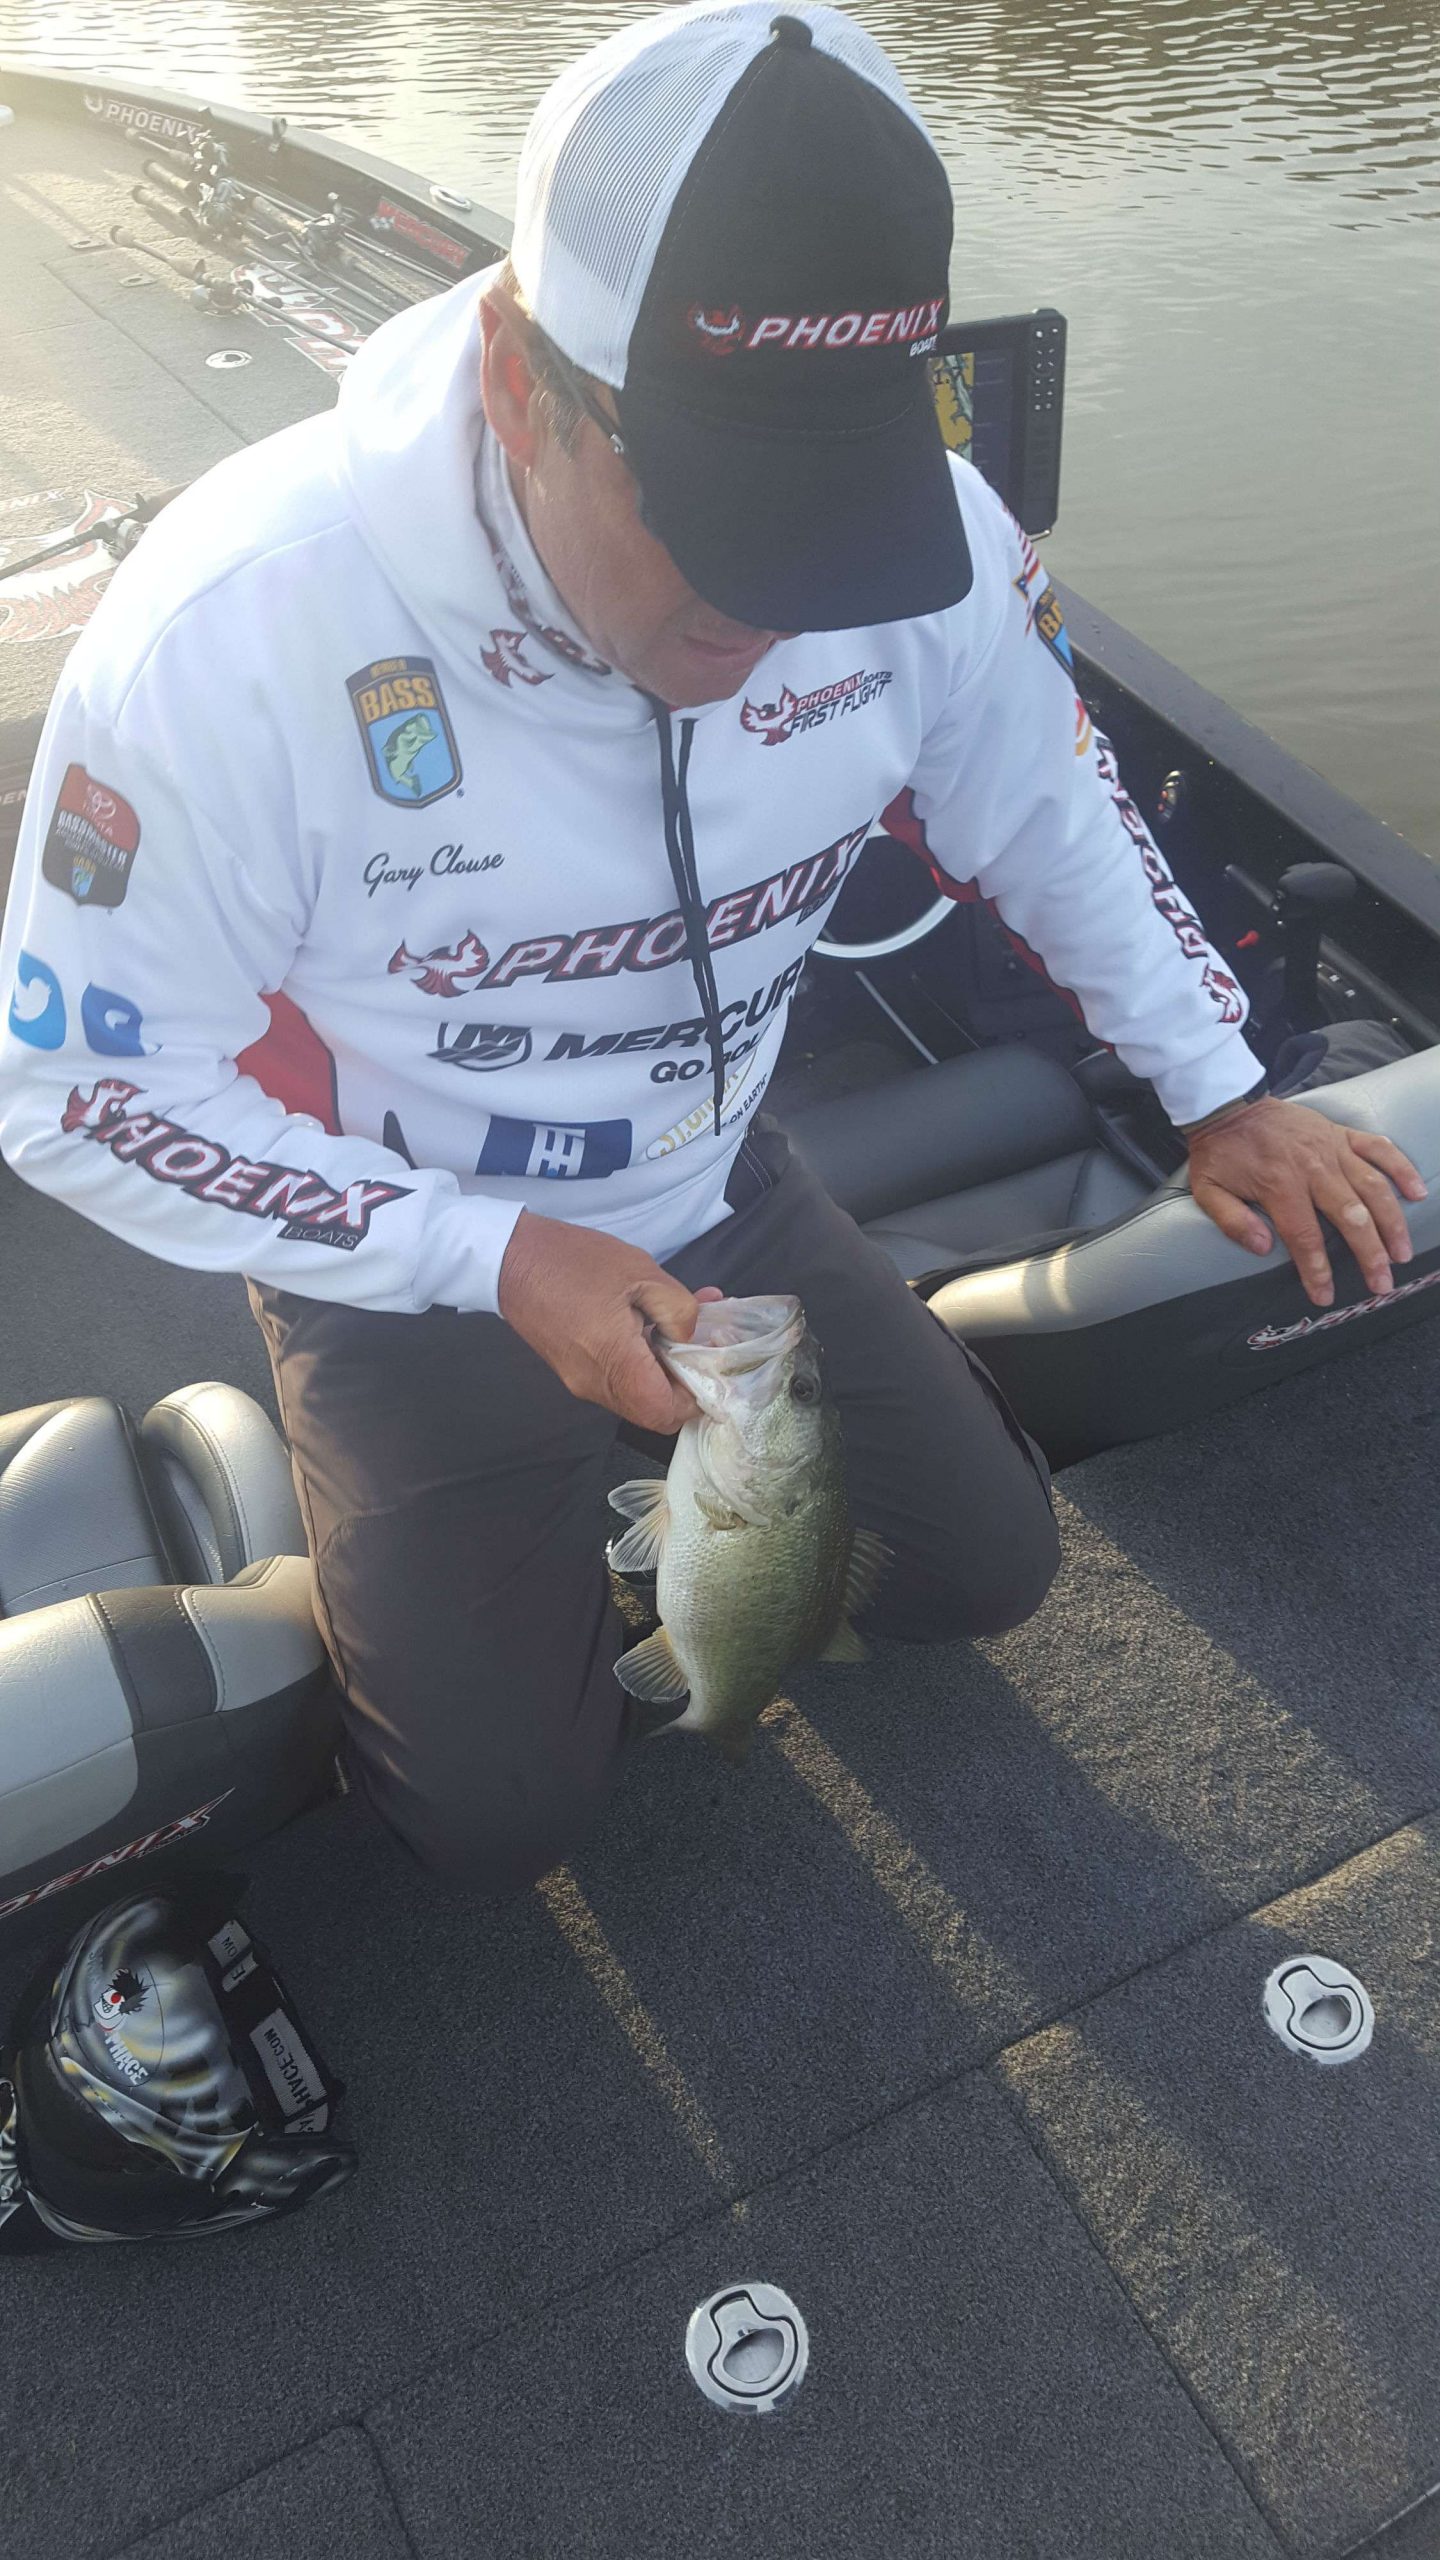 A solid fish going in the well for Gary Clouse.